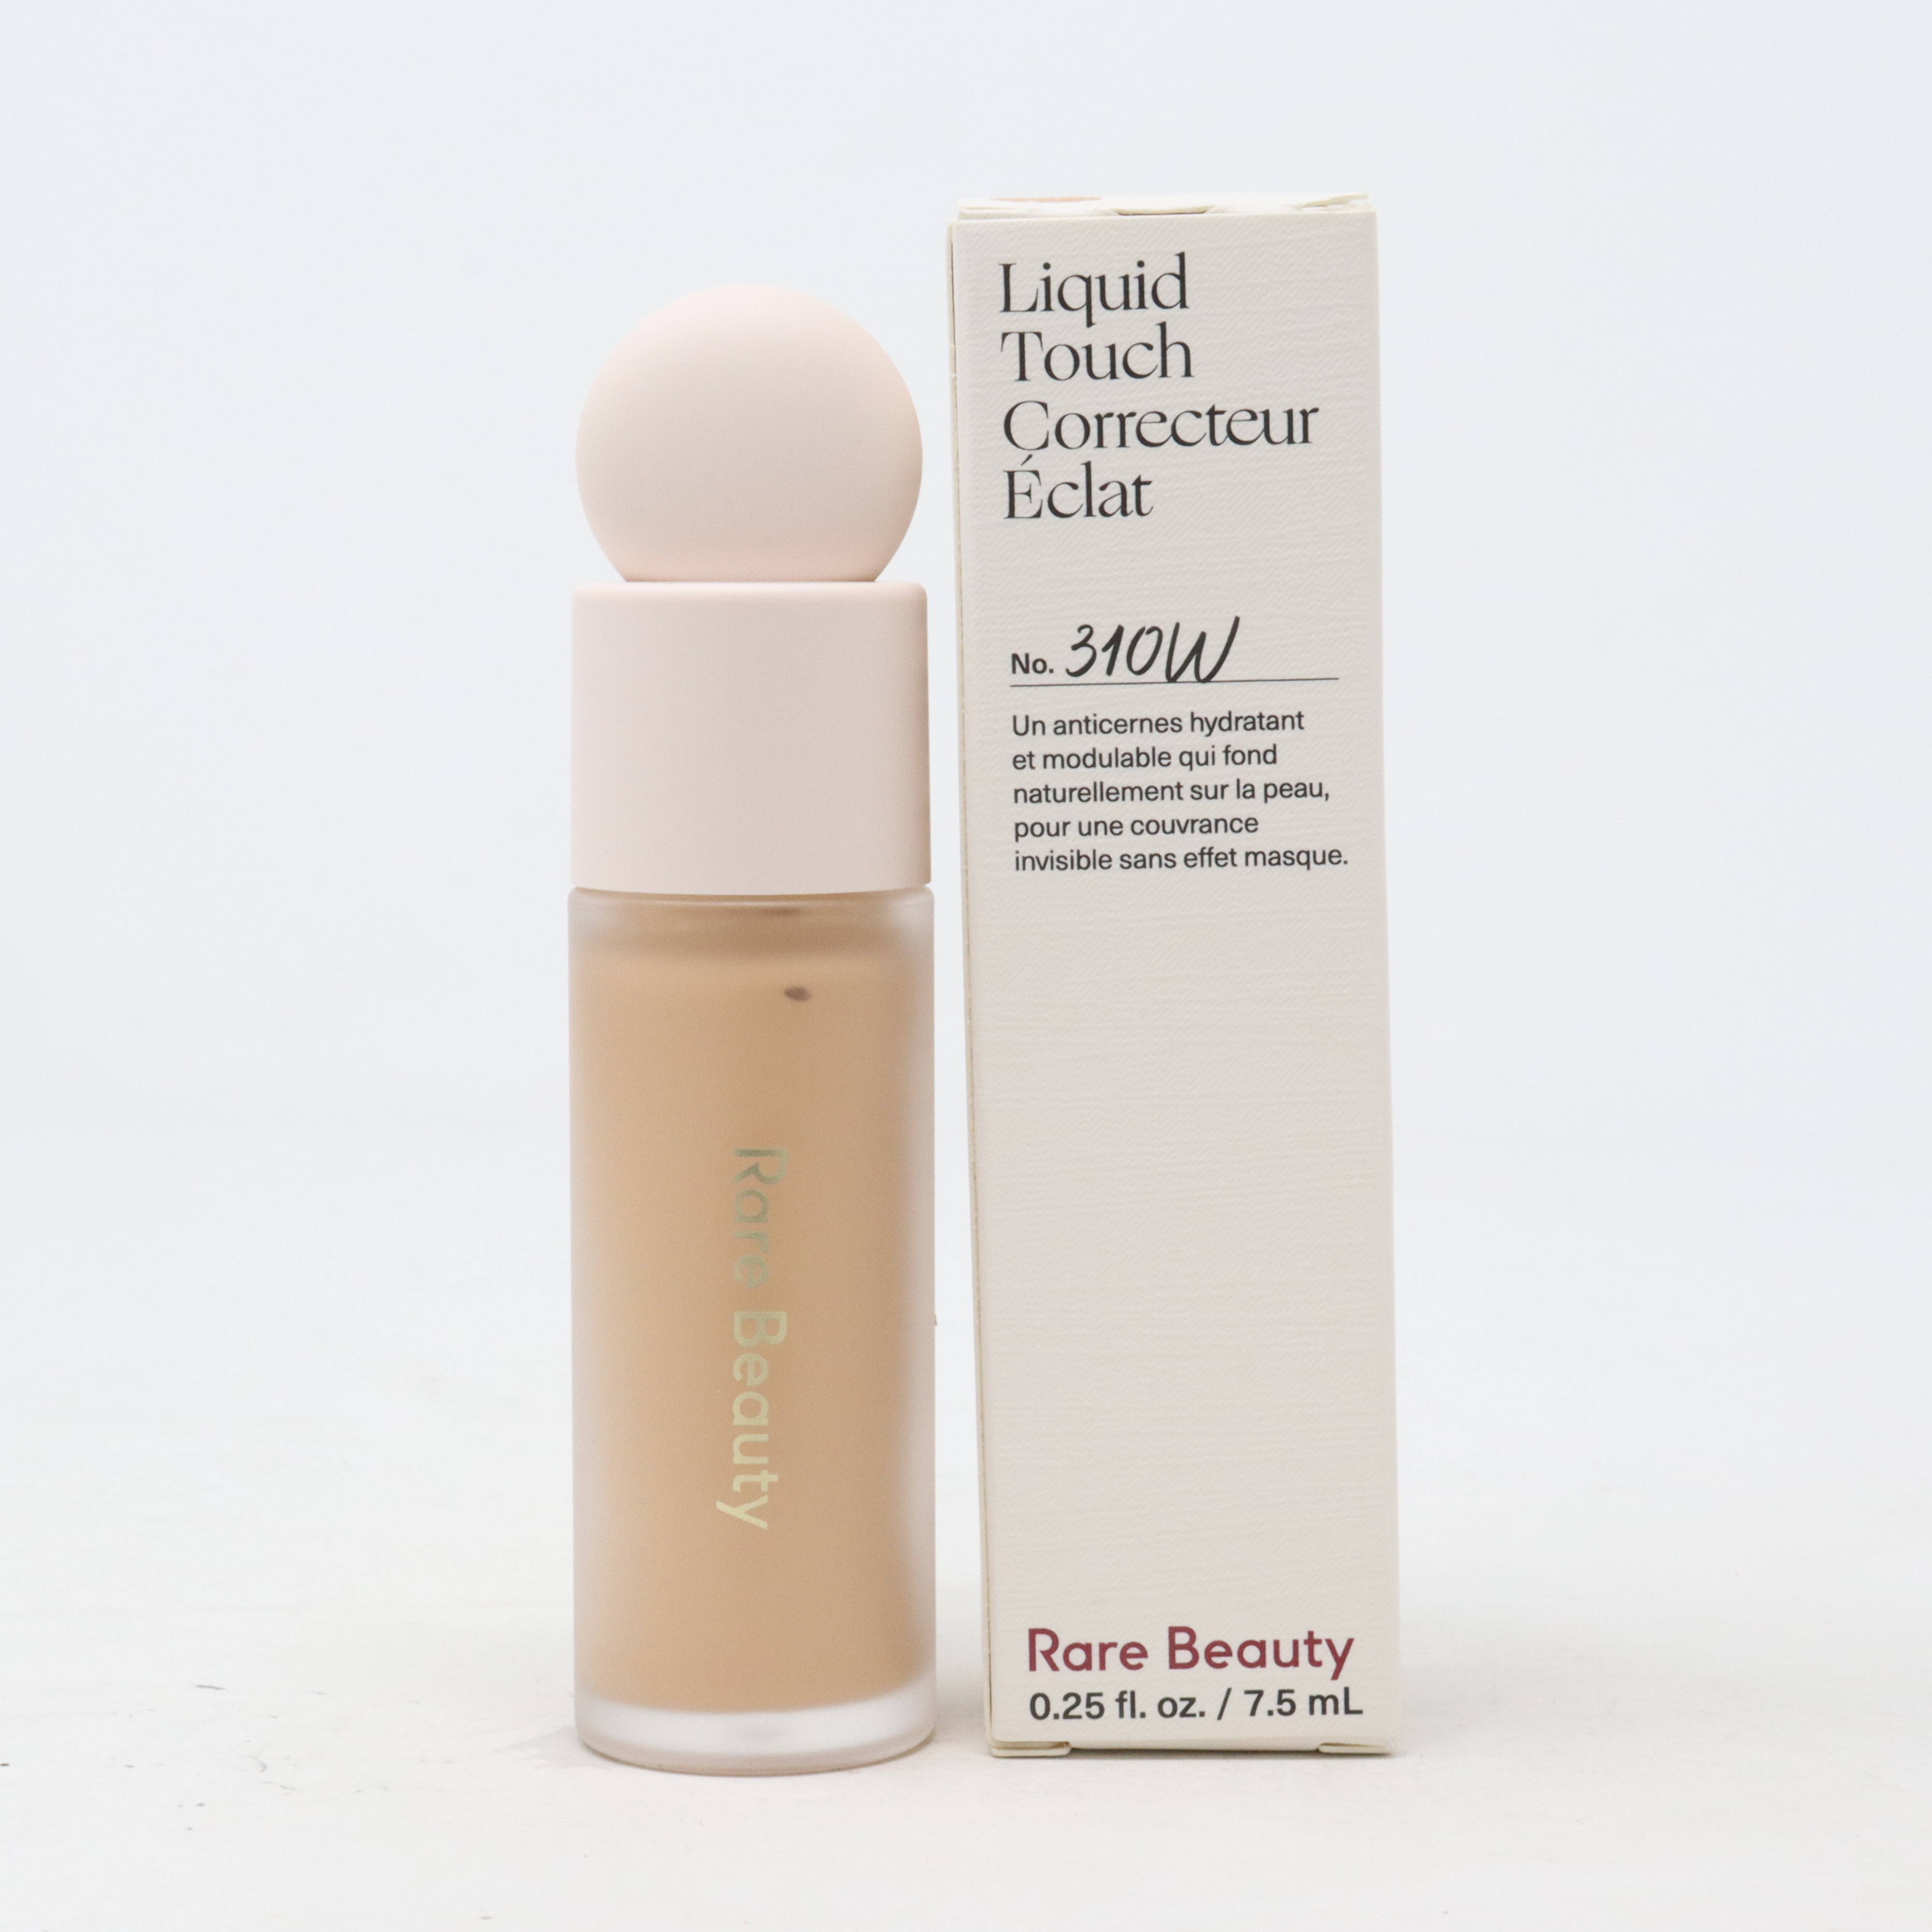  Rare Beauty by Selena Gomez Liquid Touch Weightless Foundation  180W : Beauty & Personal Care